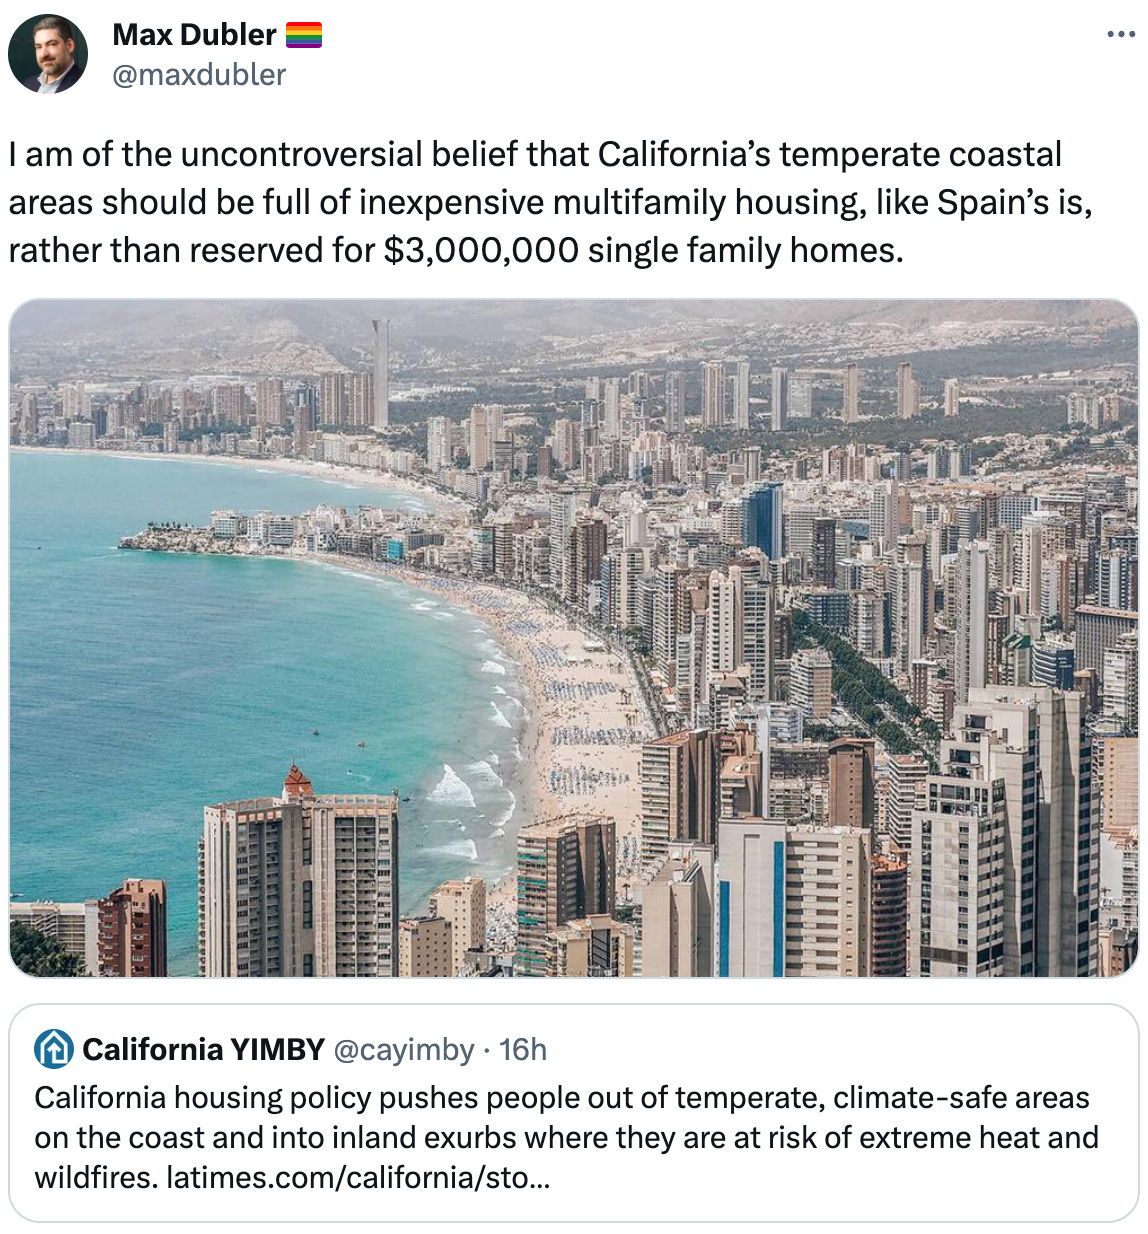  Max Dubler 🏳️‍🌈 @maxdubler I am of the uncontroversial belief that California’s temperate coastal areas should be full of inexpensive multifamily housing, like Spain’s is, rather than reserved for $3,000,000 single family homes. Quote California YIMBY @cayimby · 16h California housing policy pushes people out of temperate, climate-safe areas on the coast and into inland exurbs where they are at risk of extreme heat and wildfires. https://latimes.com/california/story/2023-08-25/californians-move-inland-for-safety-affordability-many-find-extreme-heat-thats-getting-worse